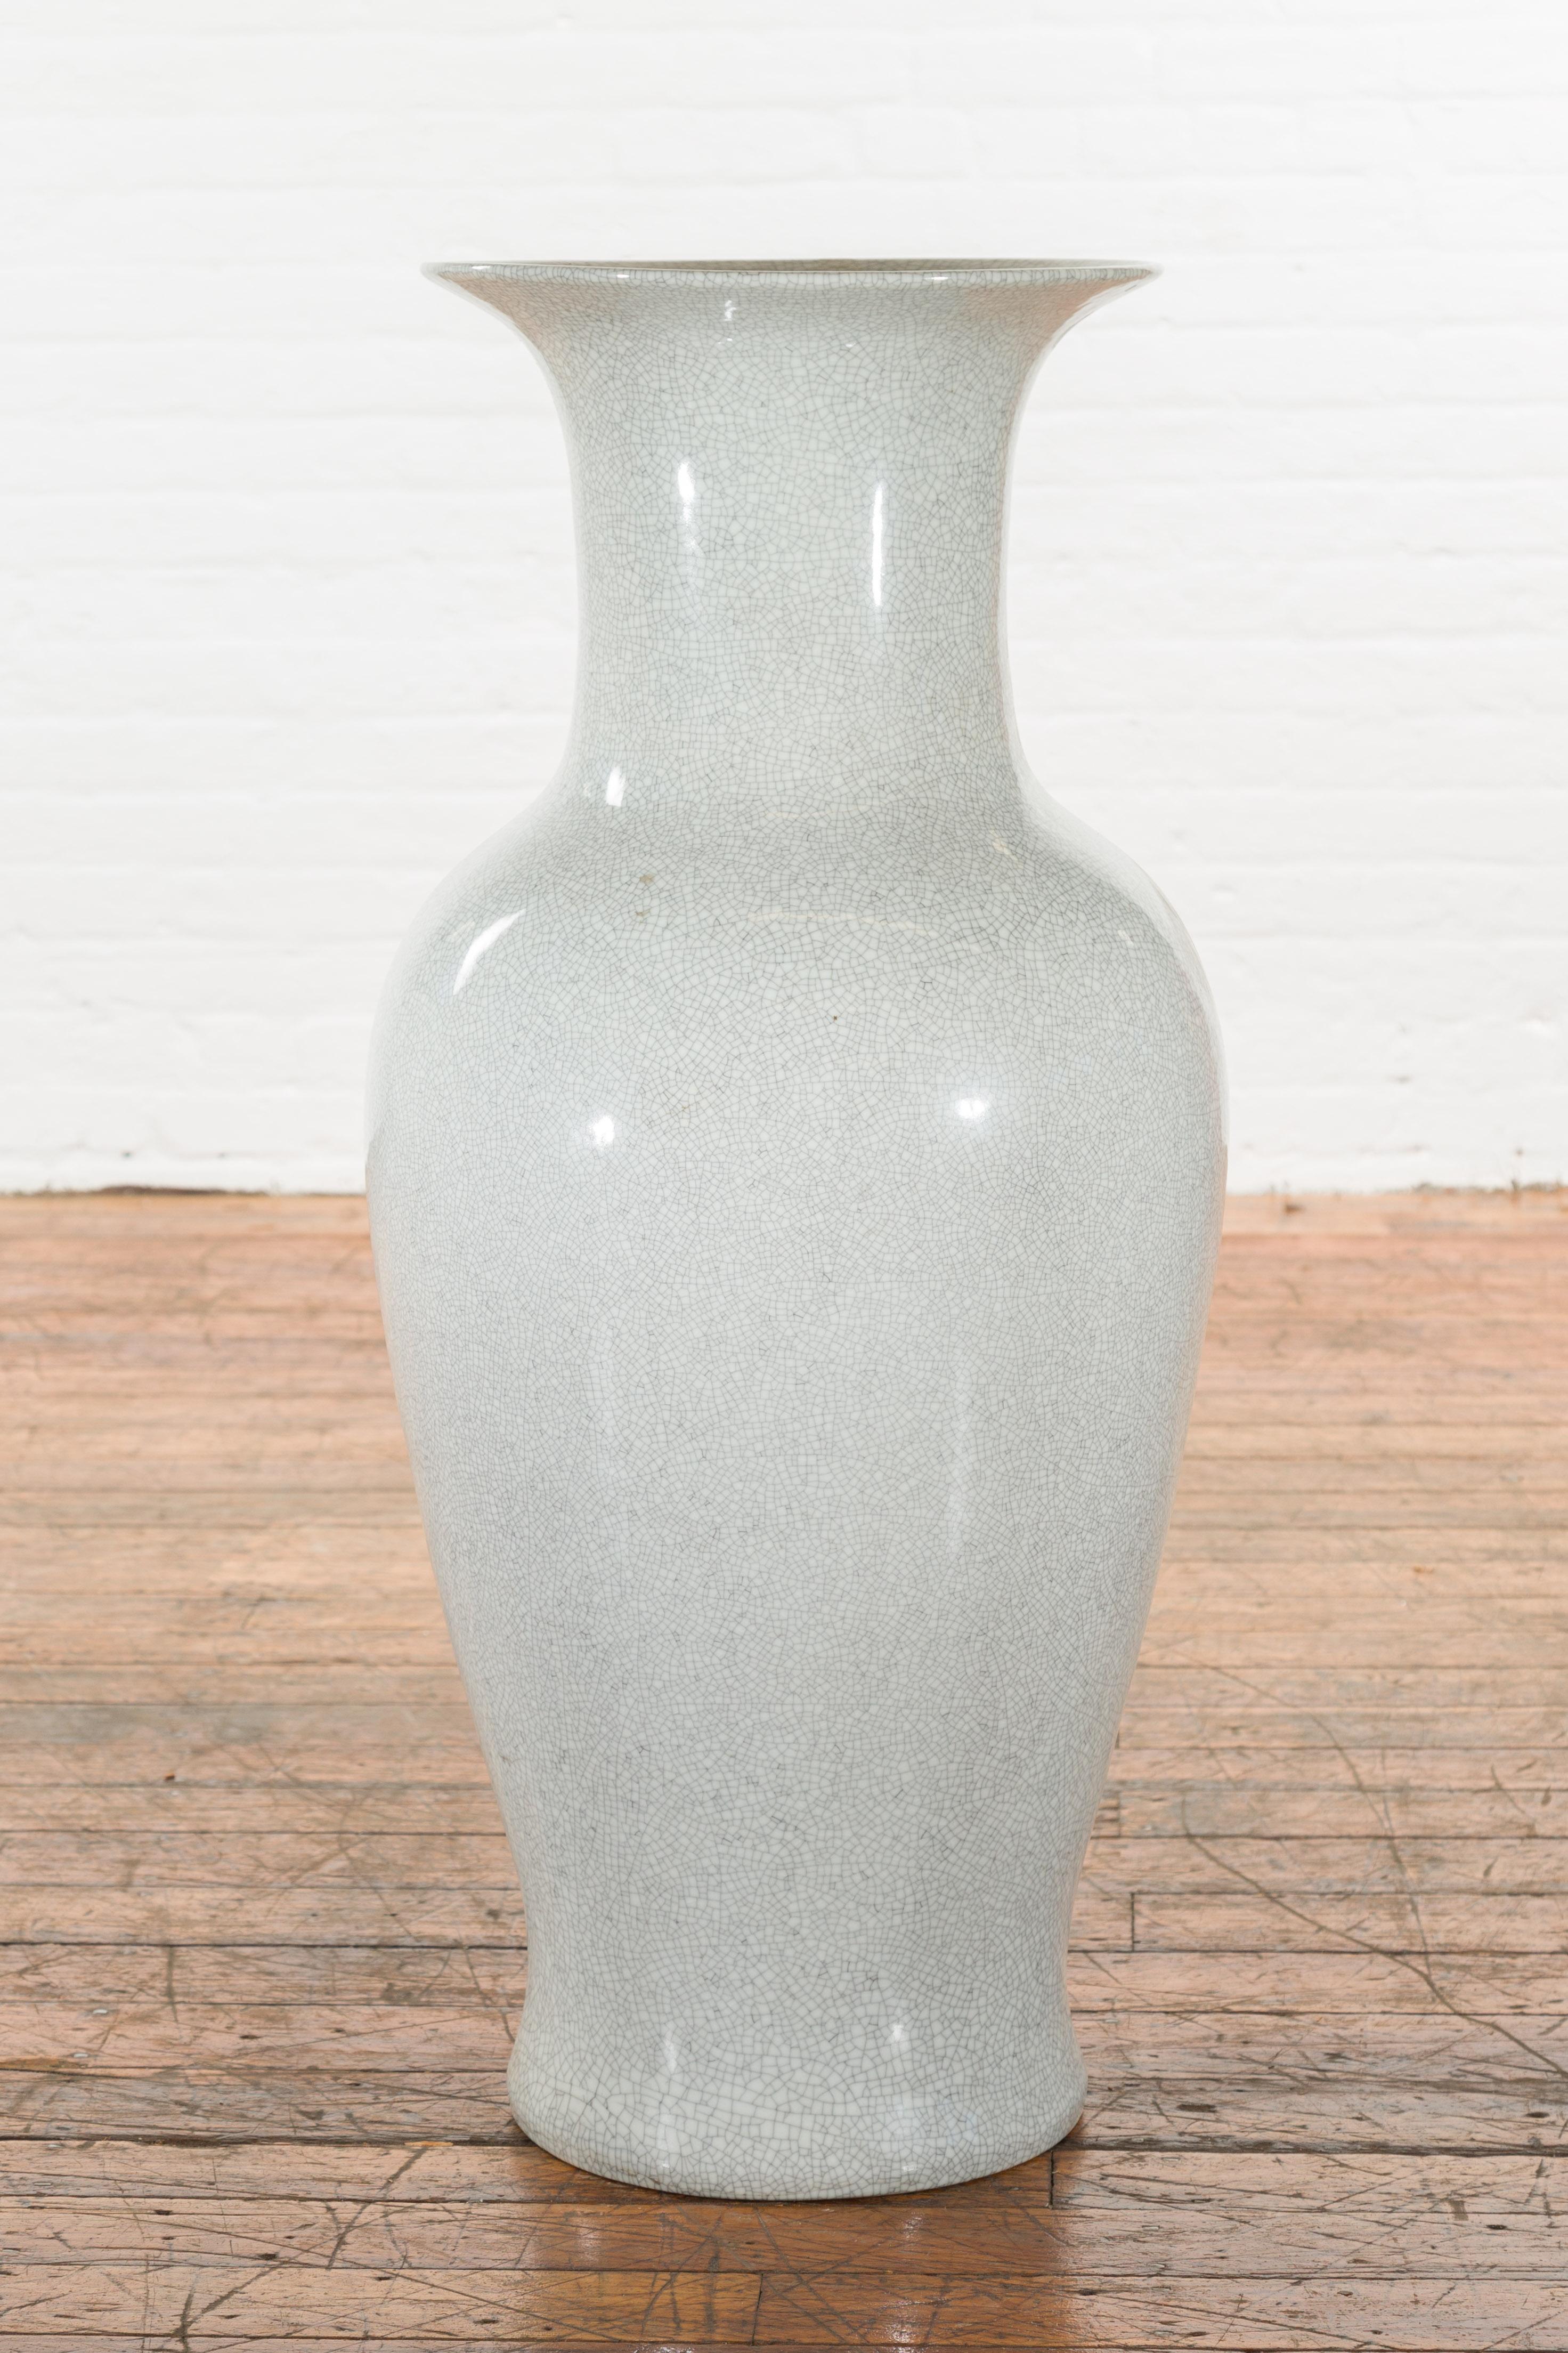 A Chinese vintage extra large grey altar vase from the mid 20th century, with crackle finish. Created in China during the midcentury period, this extra large vase features a flaring neck (with a 6.5